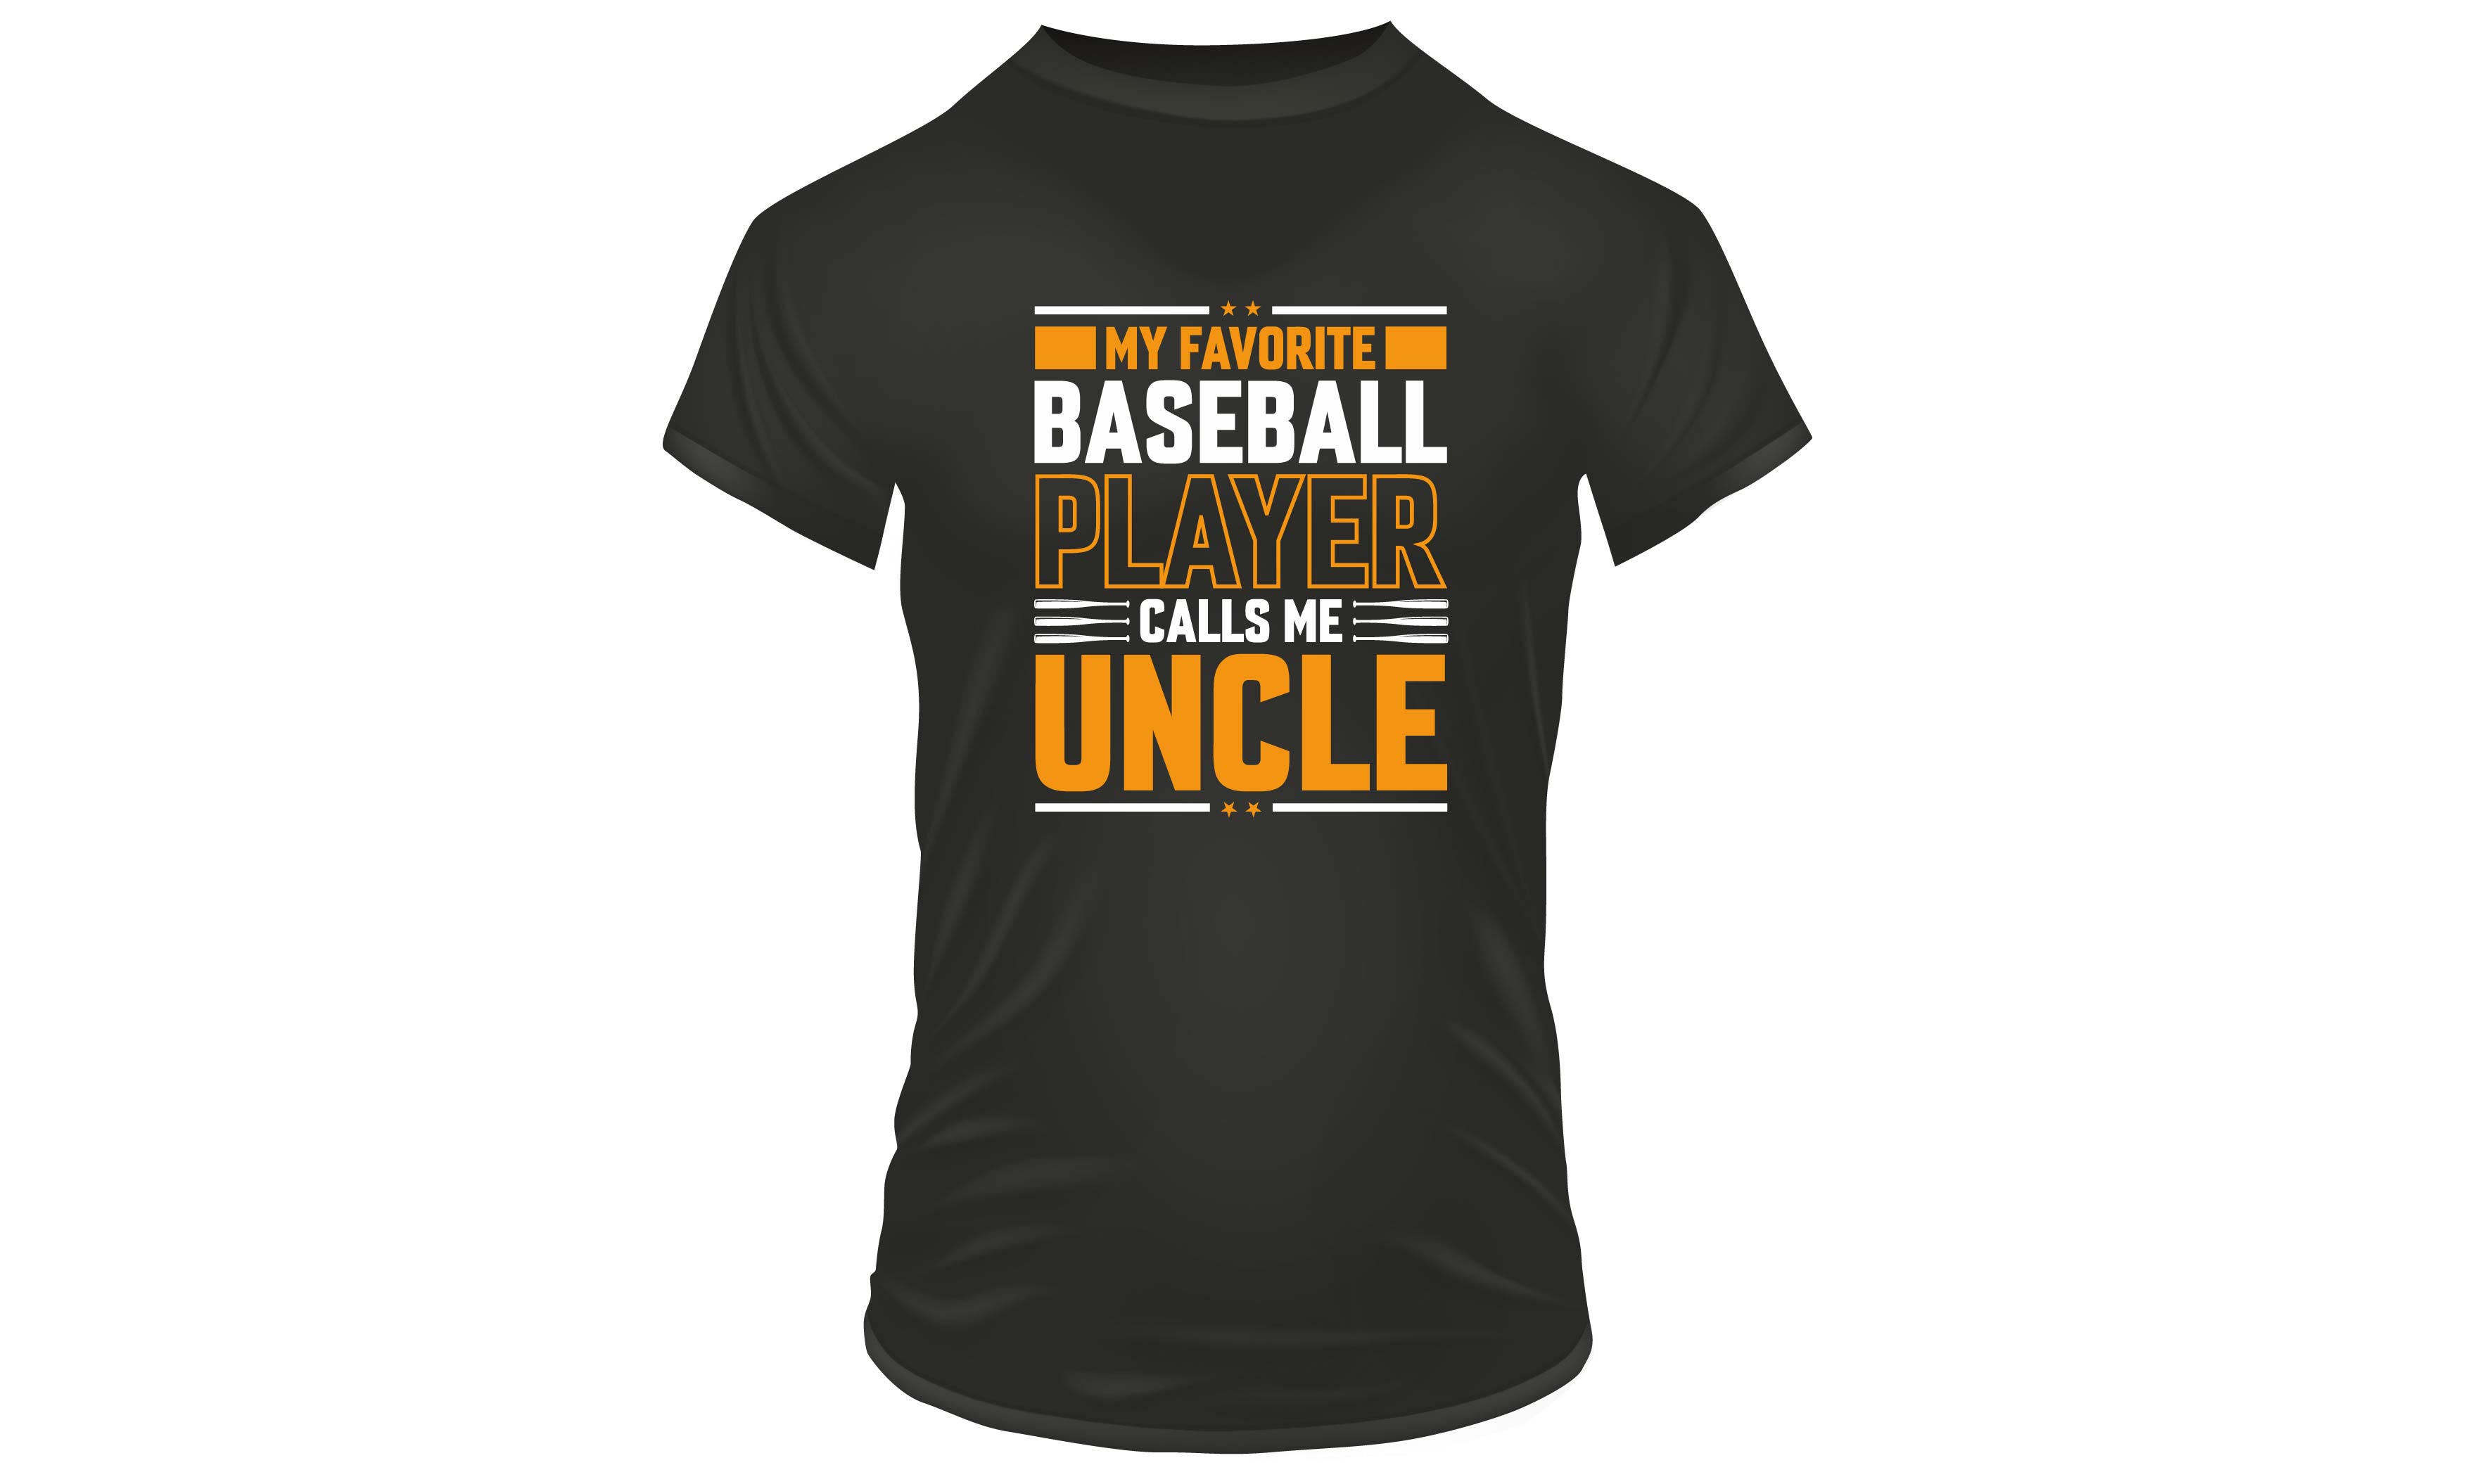 T - shirt that says my favorite baseball player is a uncle.